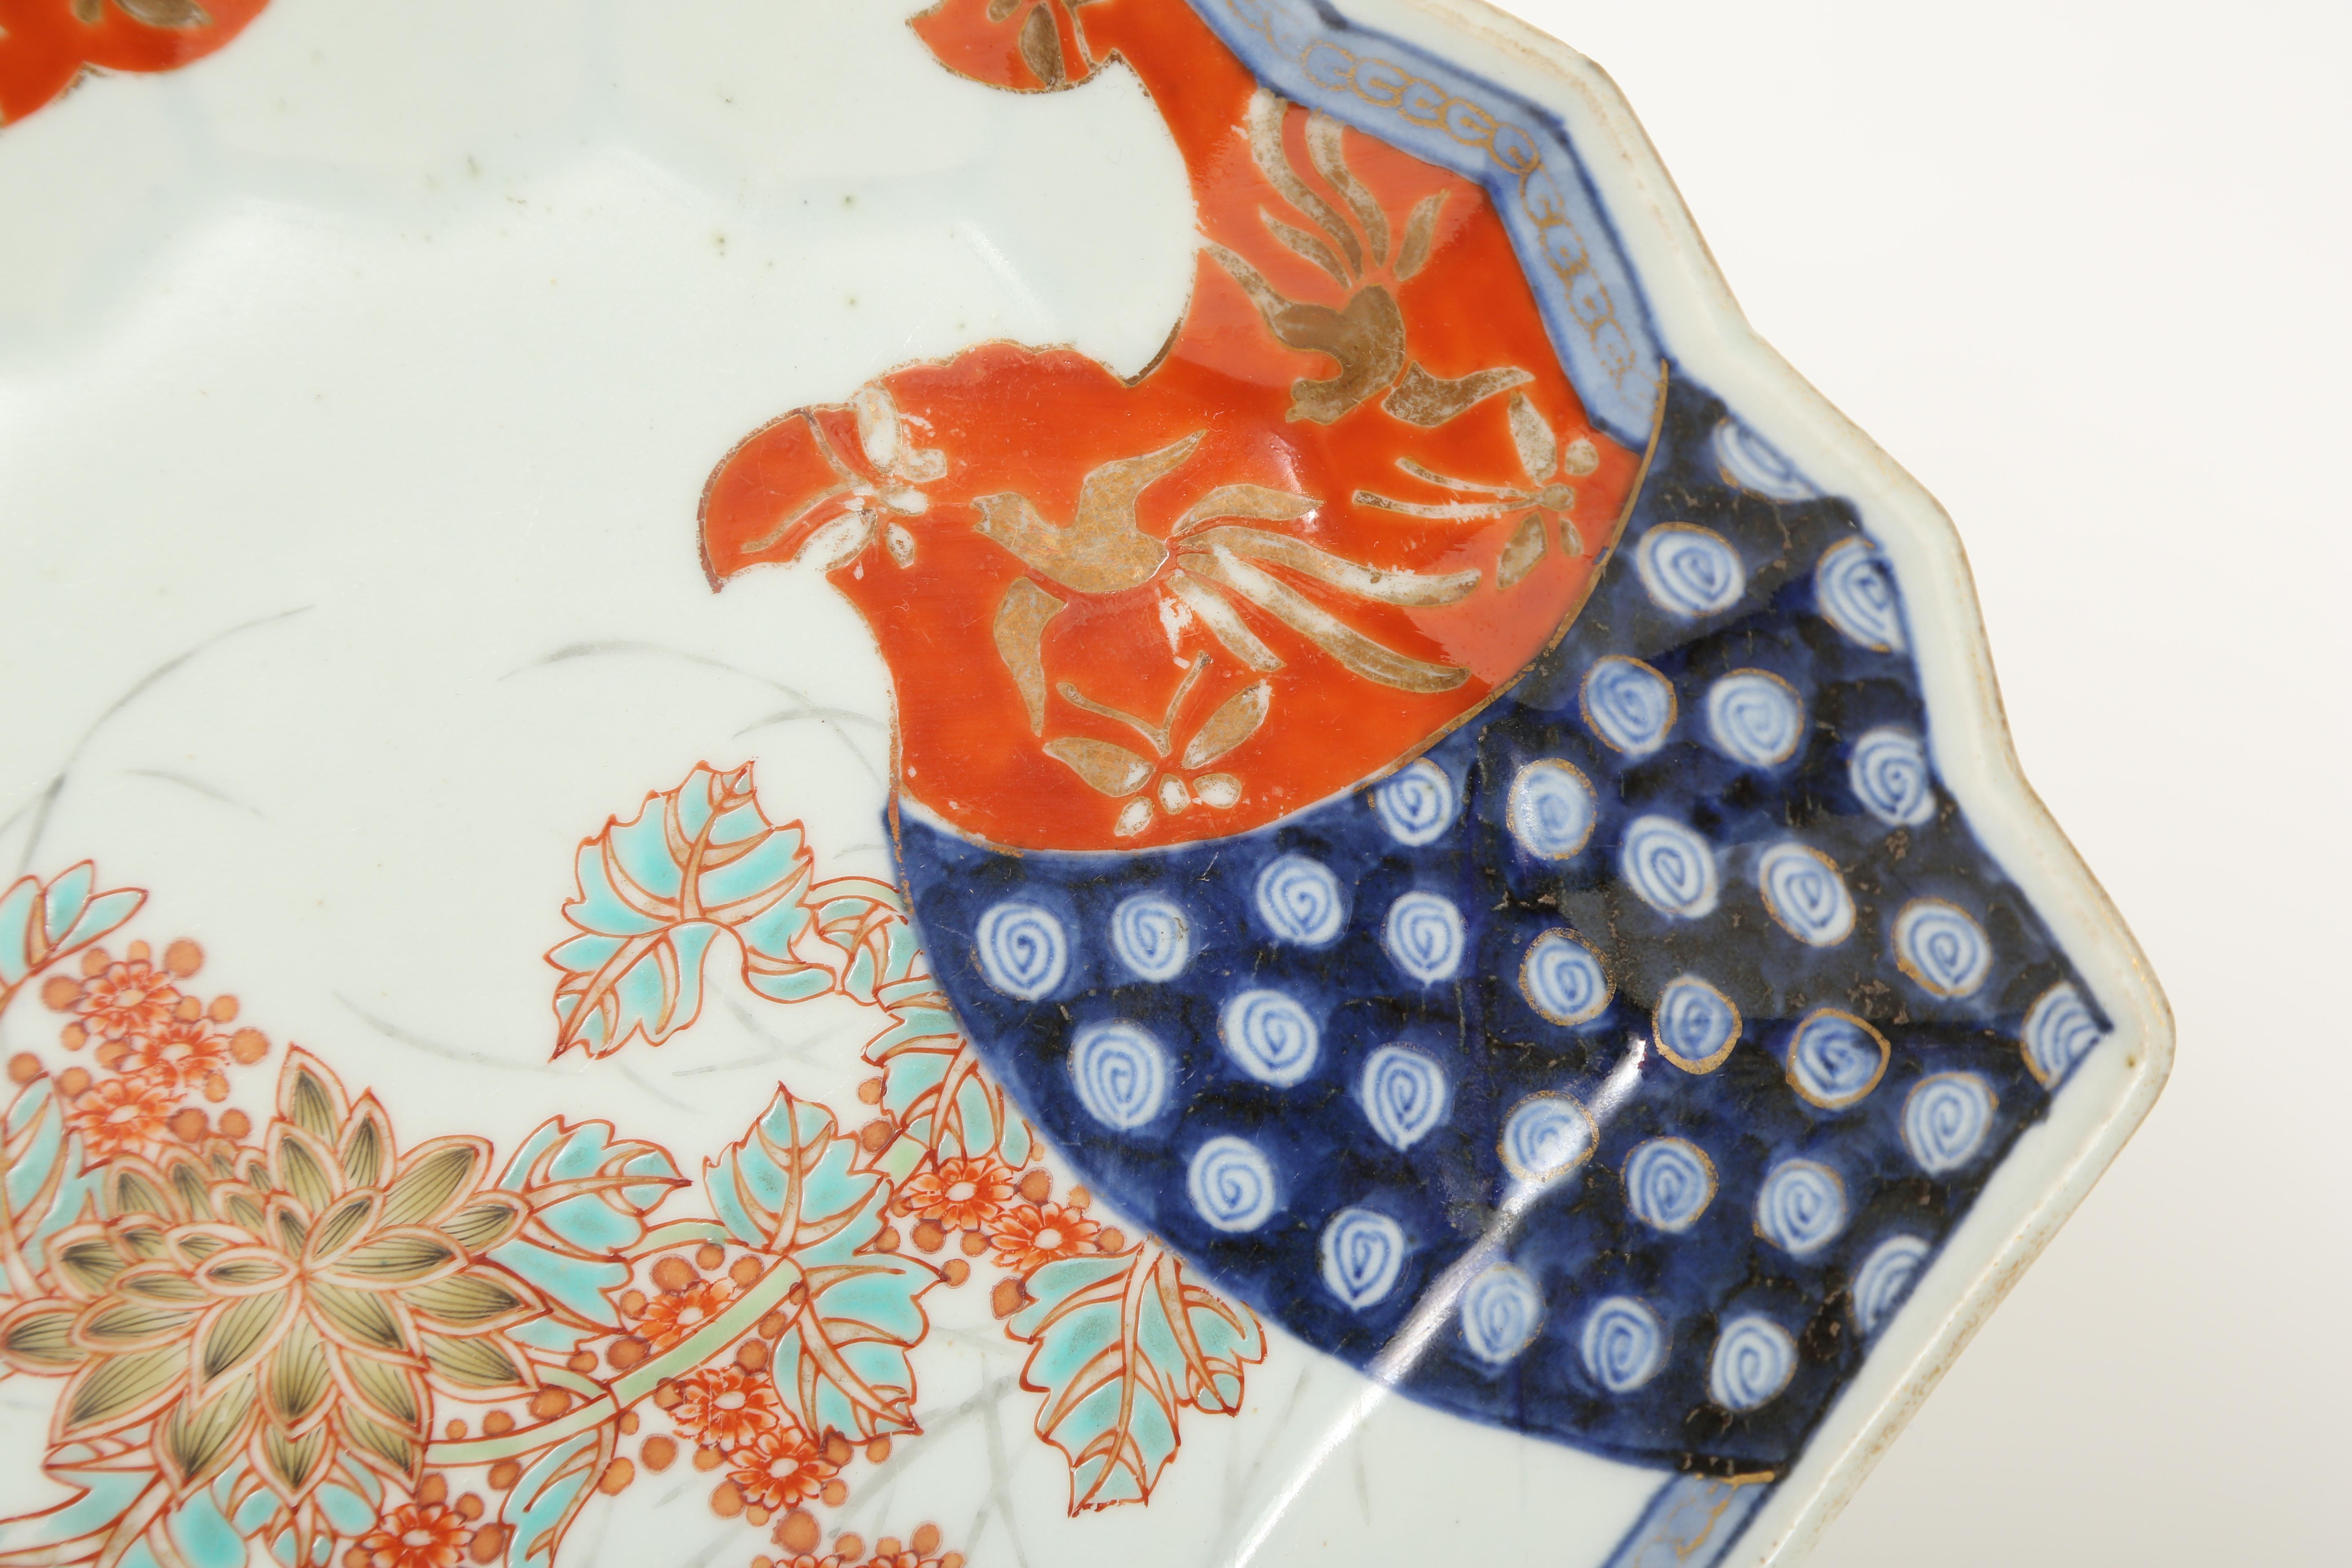 Imari fan shaped Meiji Period porcelain serving plate. It has been decorated by hand in an underglaze blue and overpainted in iron red, aqua and gold. This asymetrically designed piece could be beautifully displayed on a stand or attractive enough